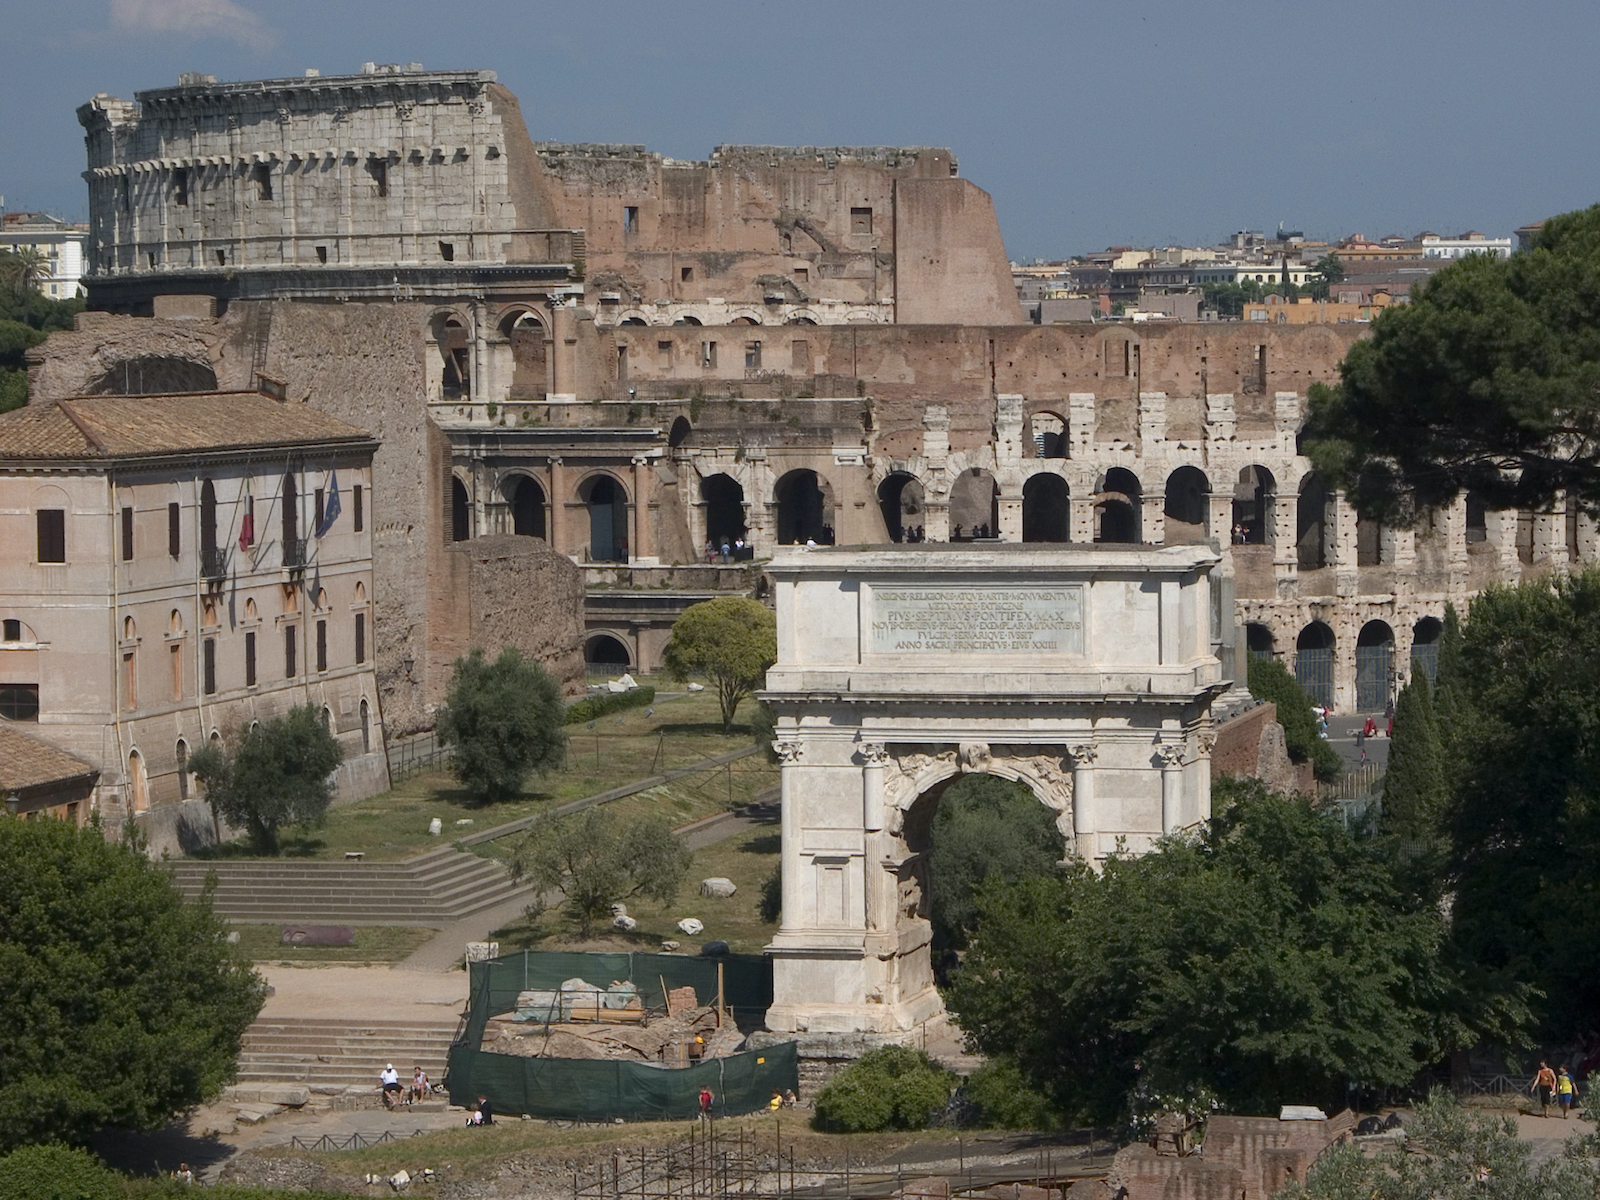 View of the Roman forum, looking toward the Colosseum (photo: Steven Zucker, CC BY-NC-SA 2.0)